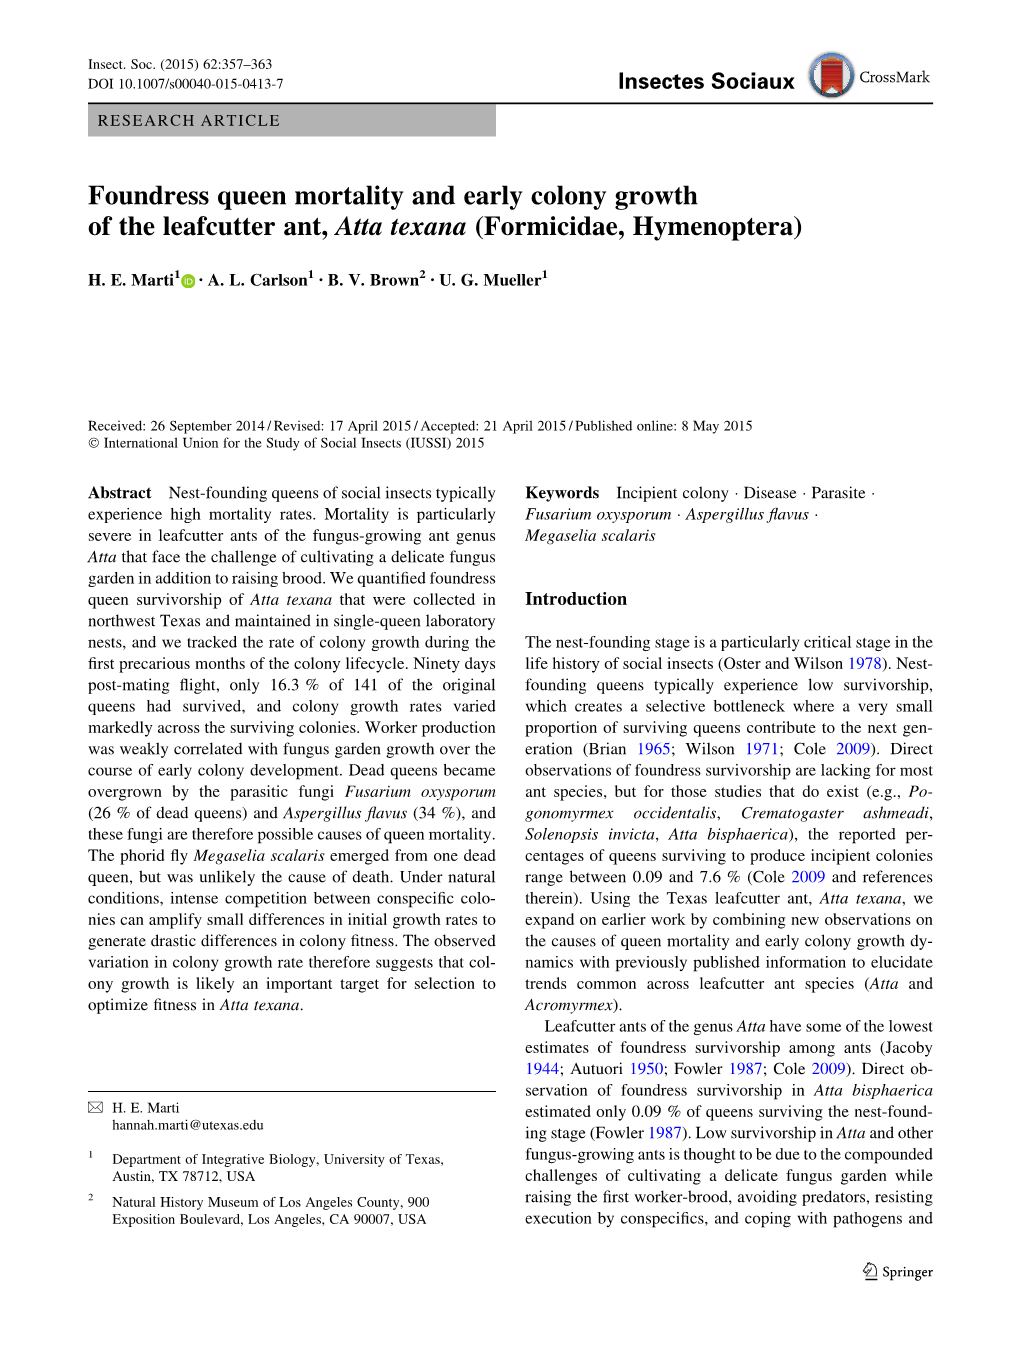 Foundress Queen Mortality and Early Colony Growth of the Leafcutter Ant, Atta Texana (Formicidae, Hymenoptera)